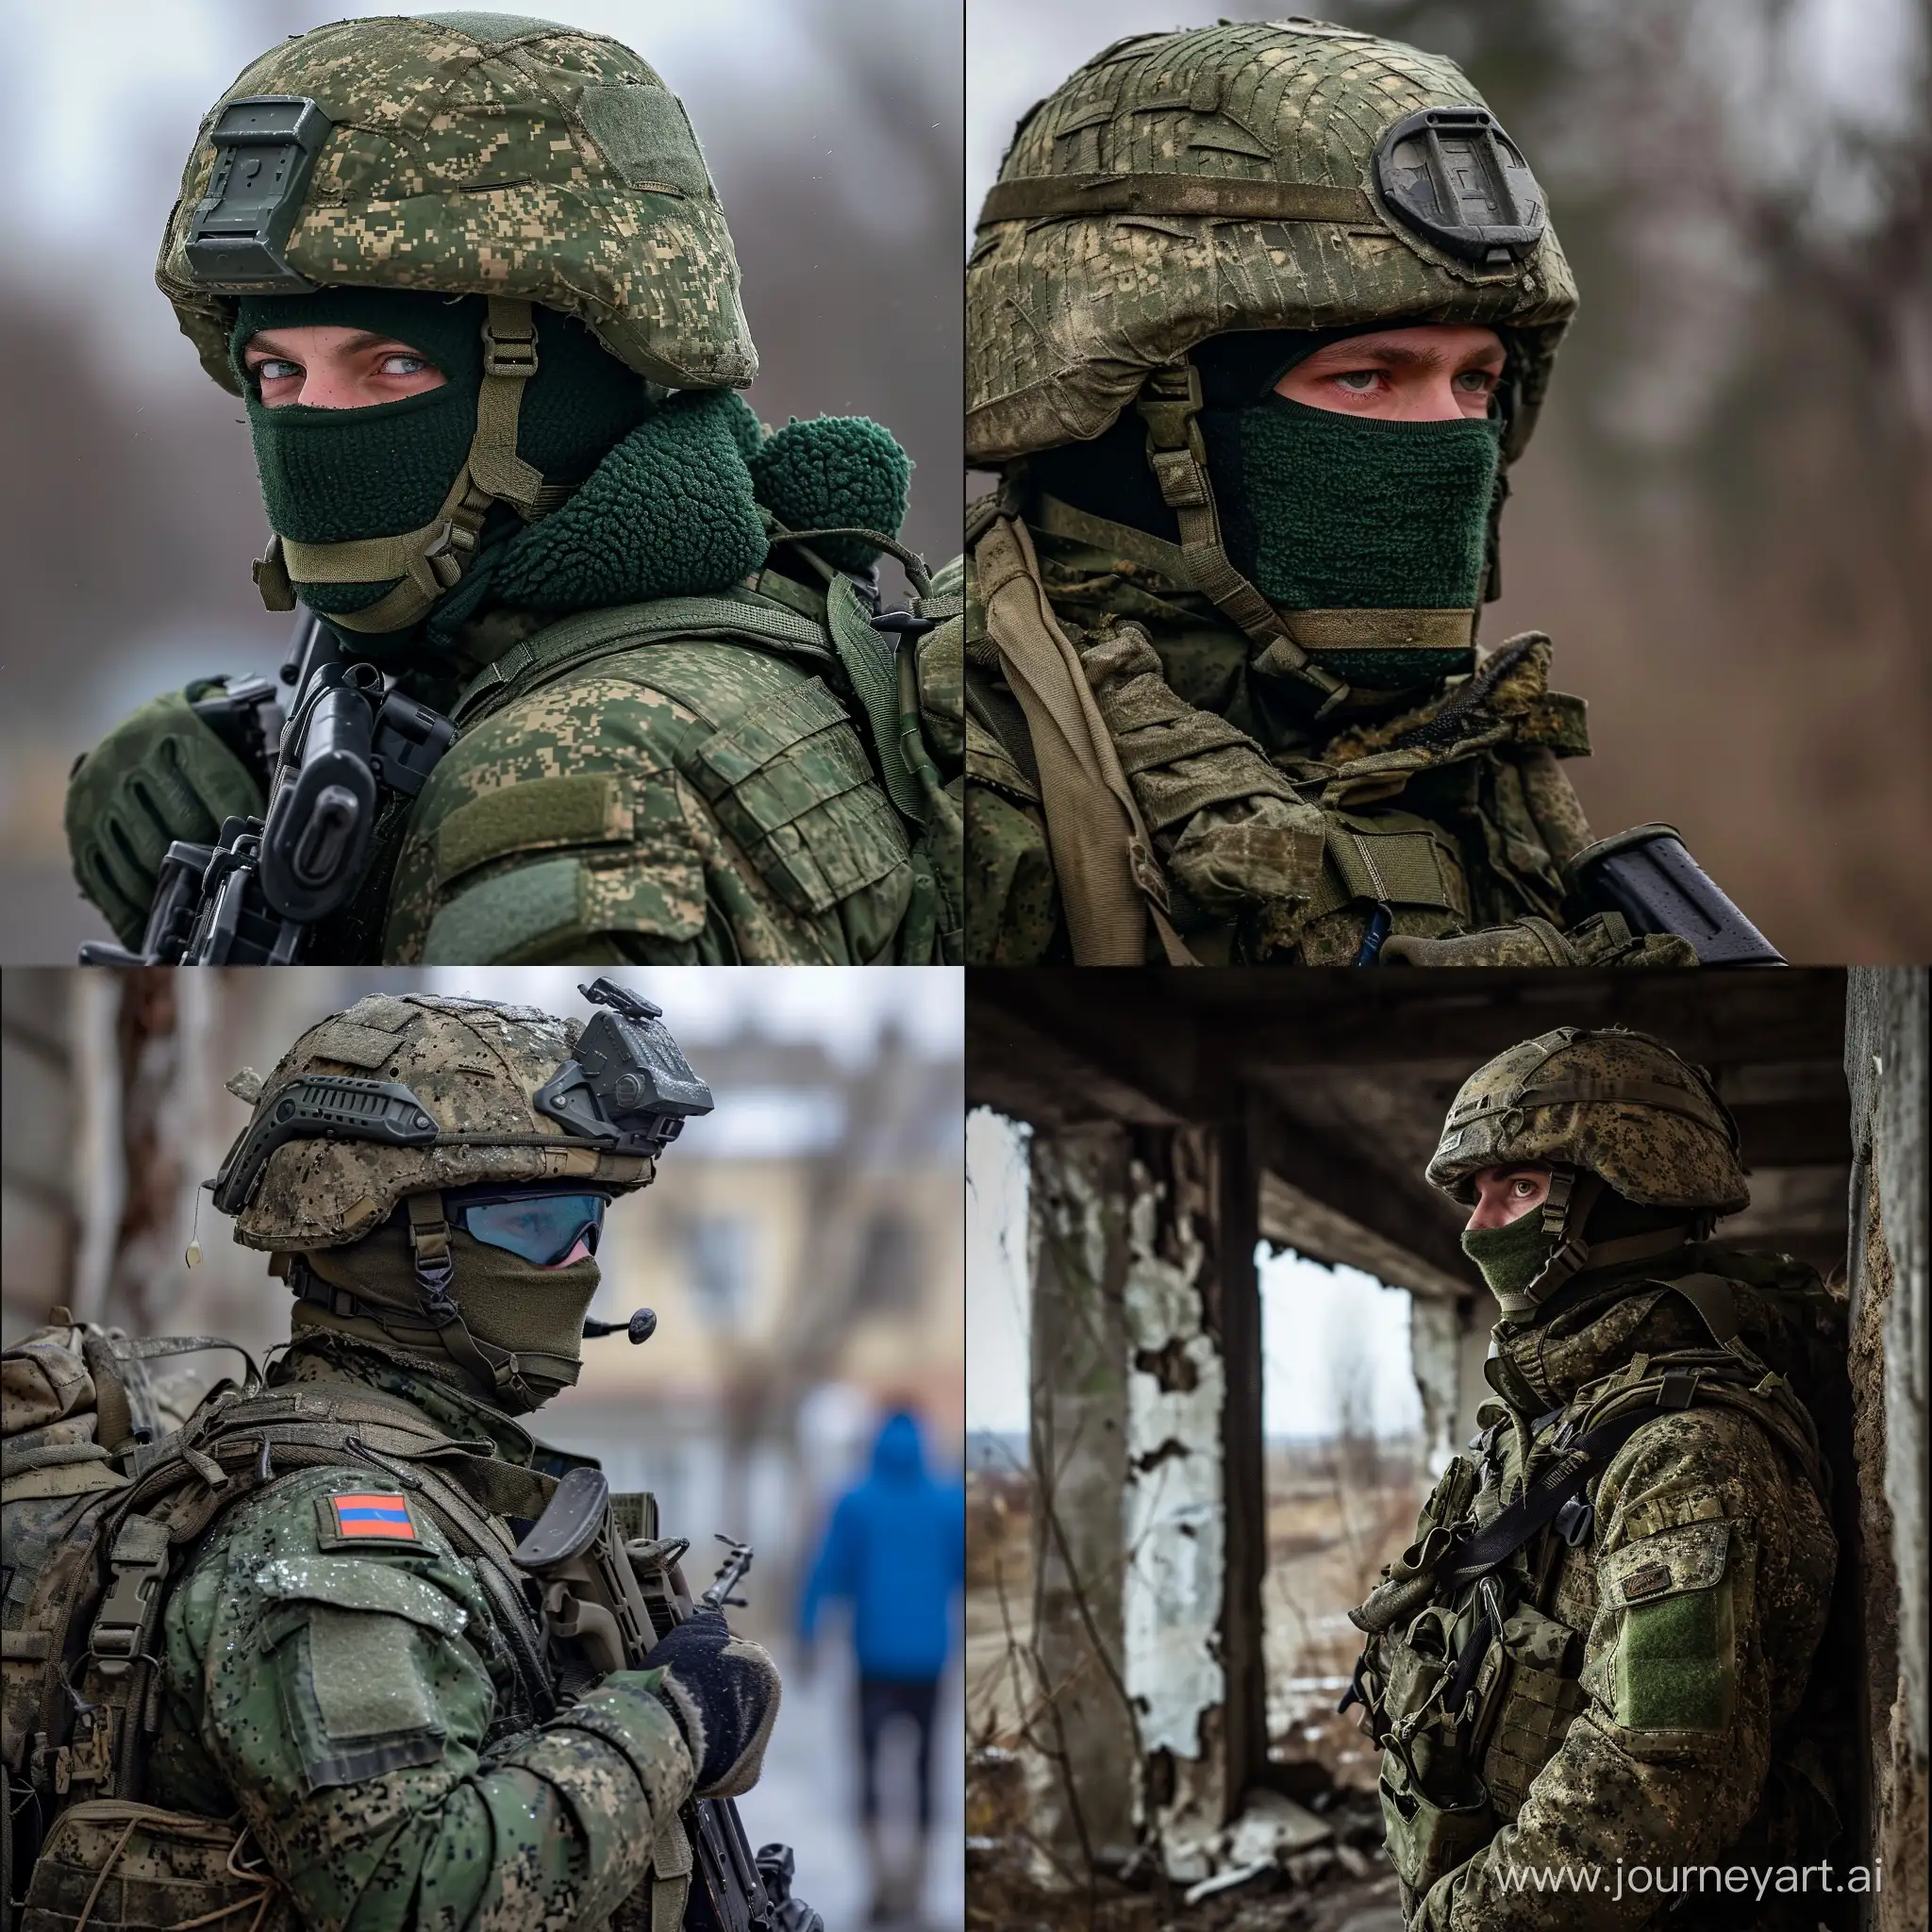 a soldier of Russia's special military operation in Ukraine